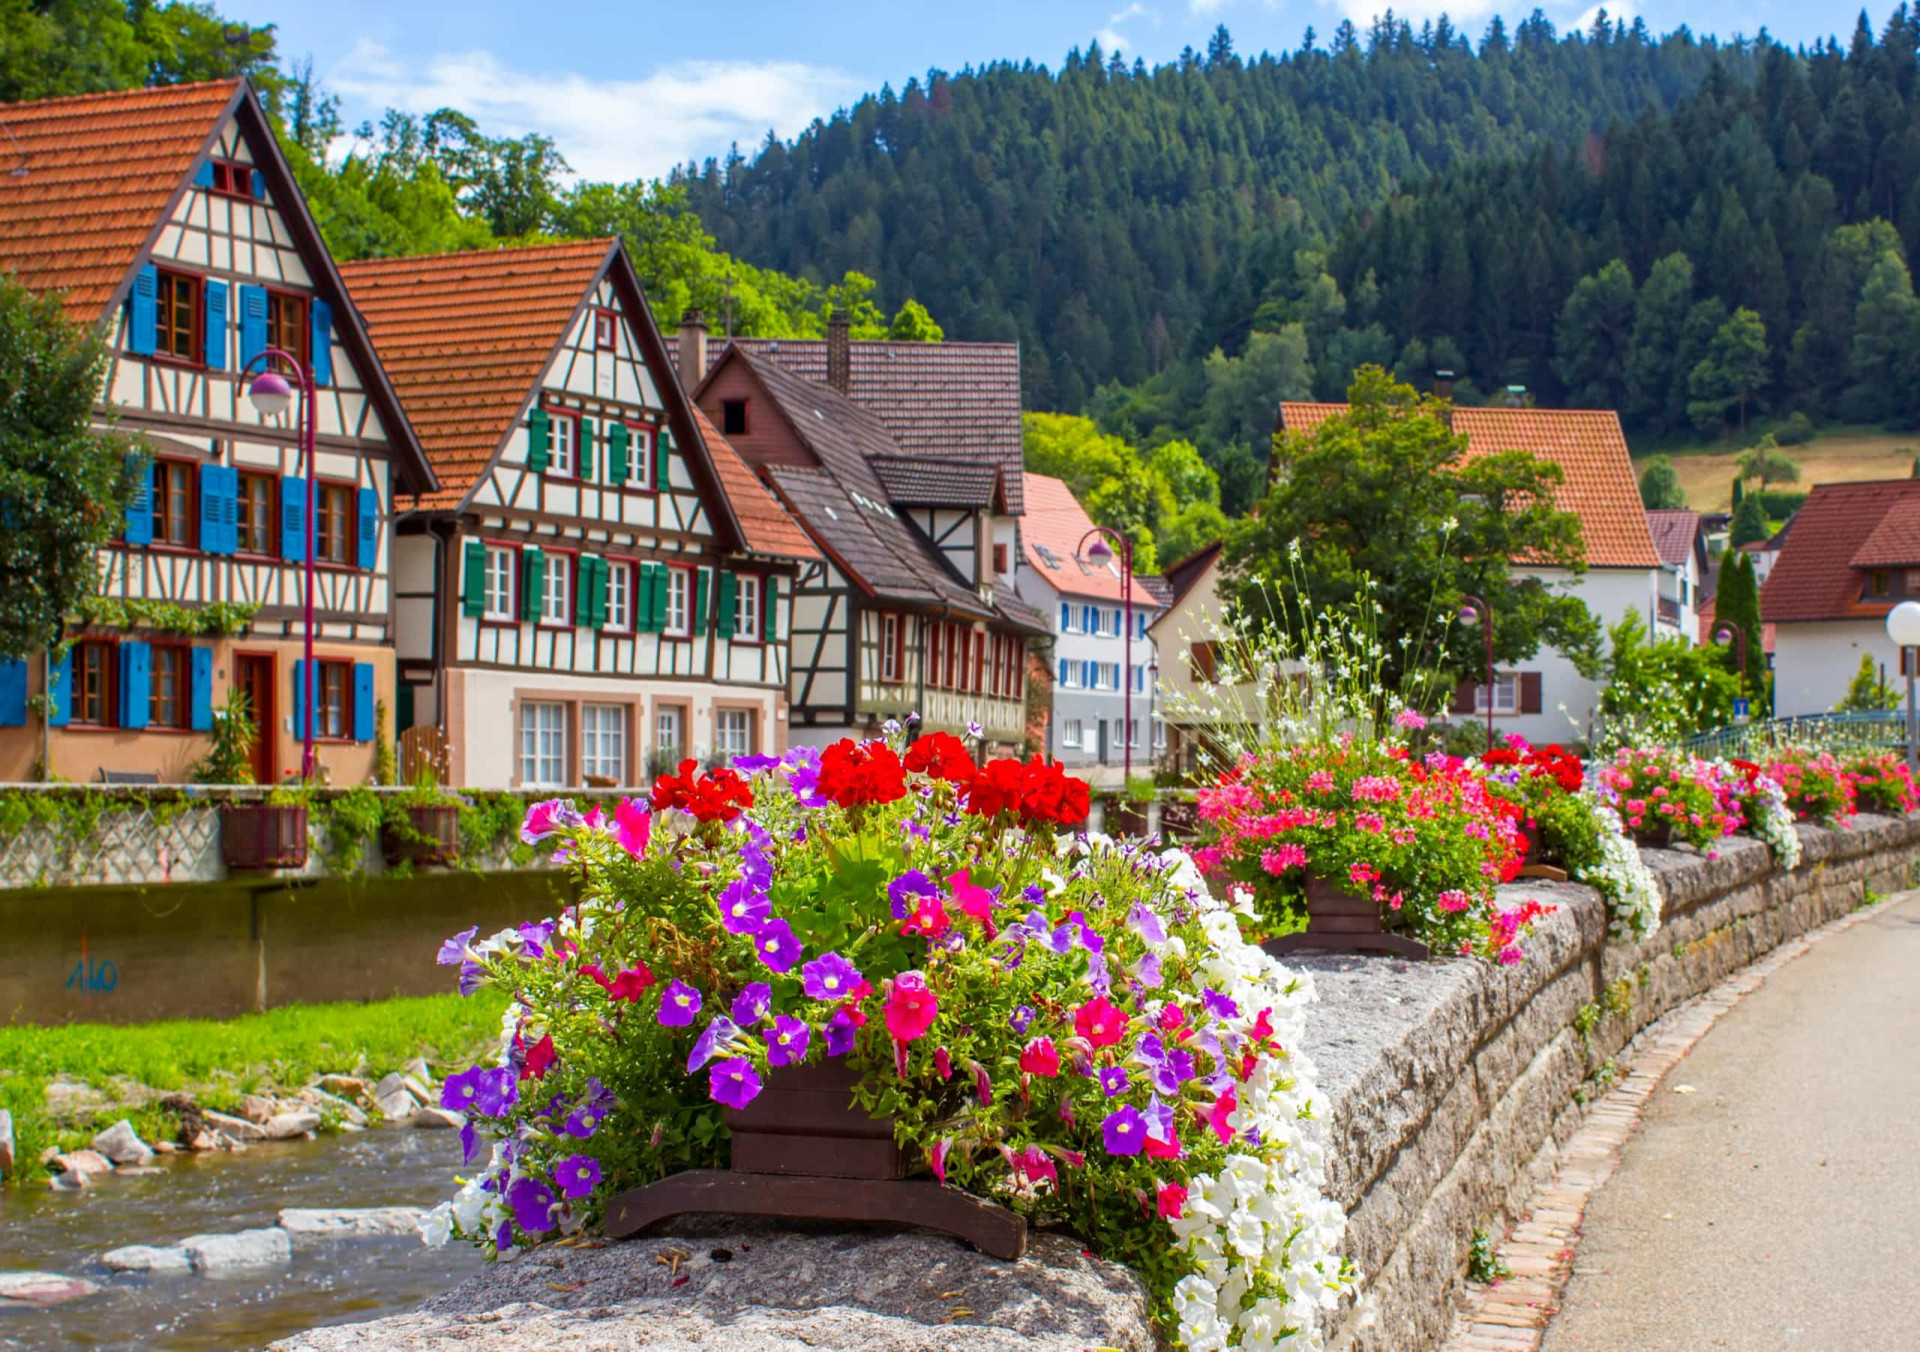 <p>Nestling on the eastern fringes of the Black Forest is Schiltach, which boasts an entire medieval-era inner city, a collection of half-timber houses that date back to anywhere between the 16th and 19th centuries.</p><p>You may also like:<a href="https://www.starsinsider.com/n/472724?utm_source=msn.com&utm_medium=display&utm_campaign=referral_description&utm_content=481885v1en-us"> Celebrity parents who hide their kids from the public eye </a></p>